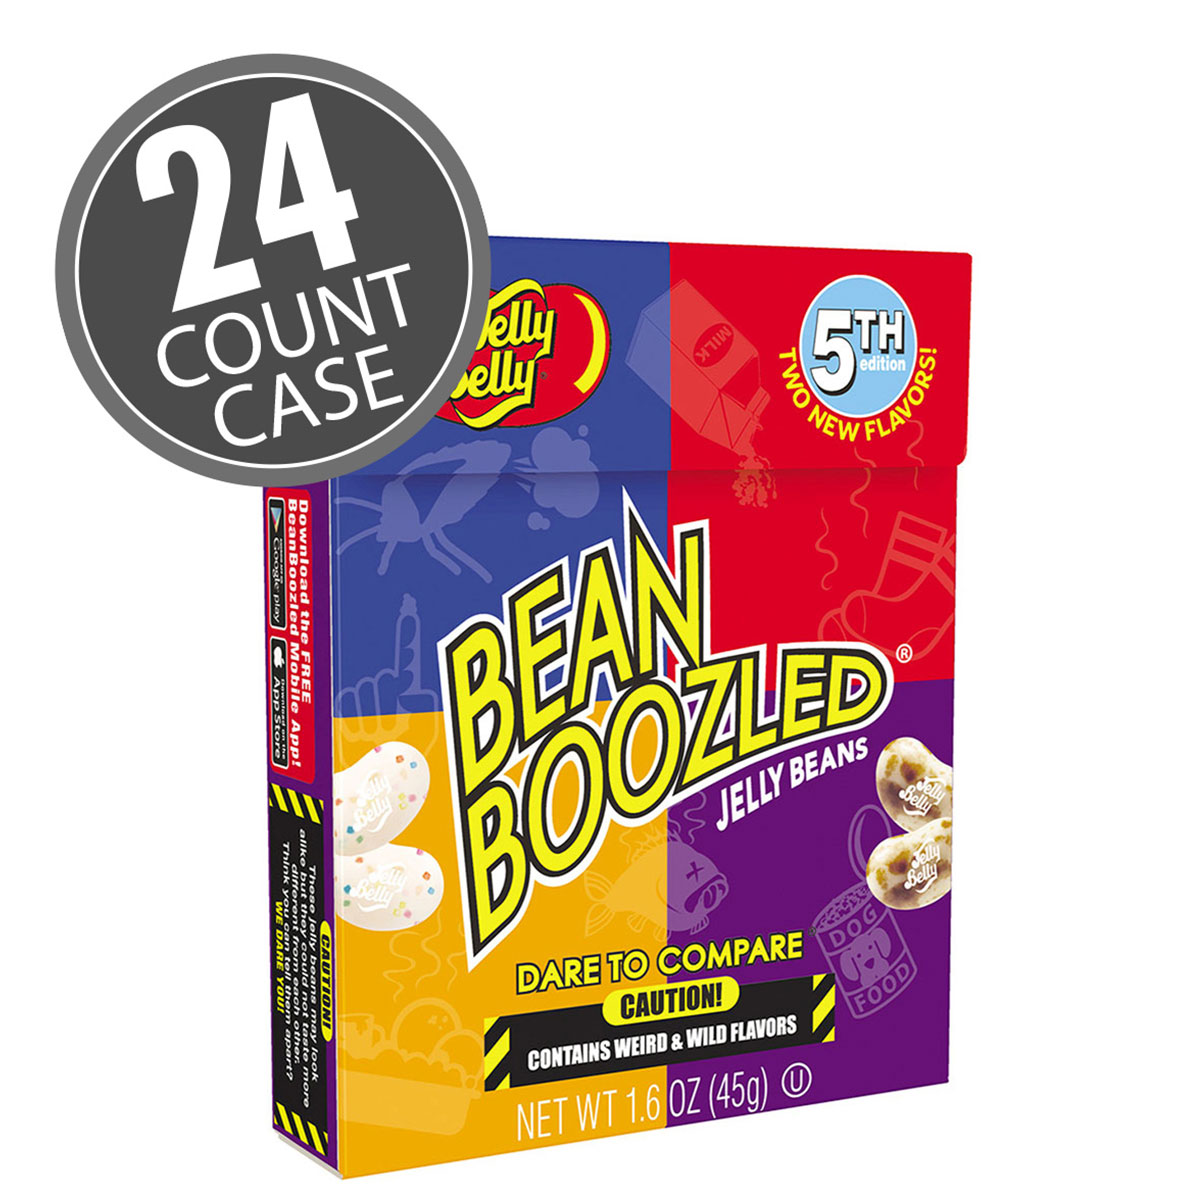 BeanBoozled Jelly Beans - 1.6 oz Box (5th edition) 24-Count Case. 